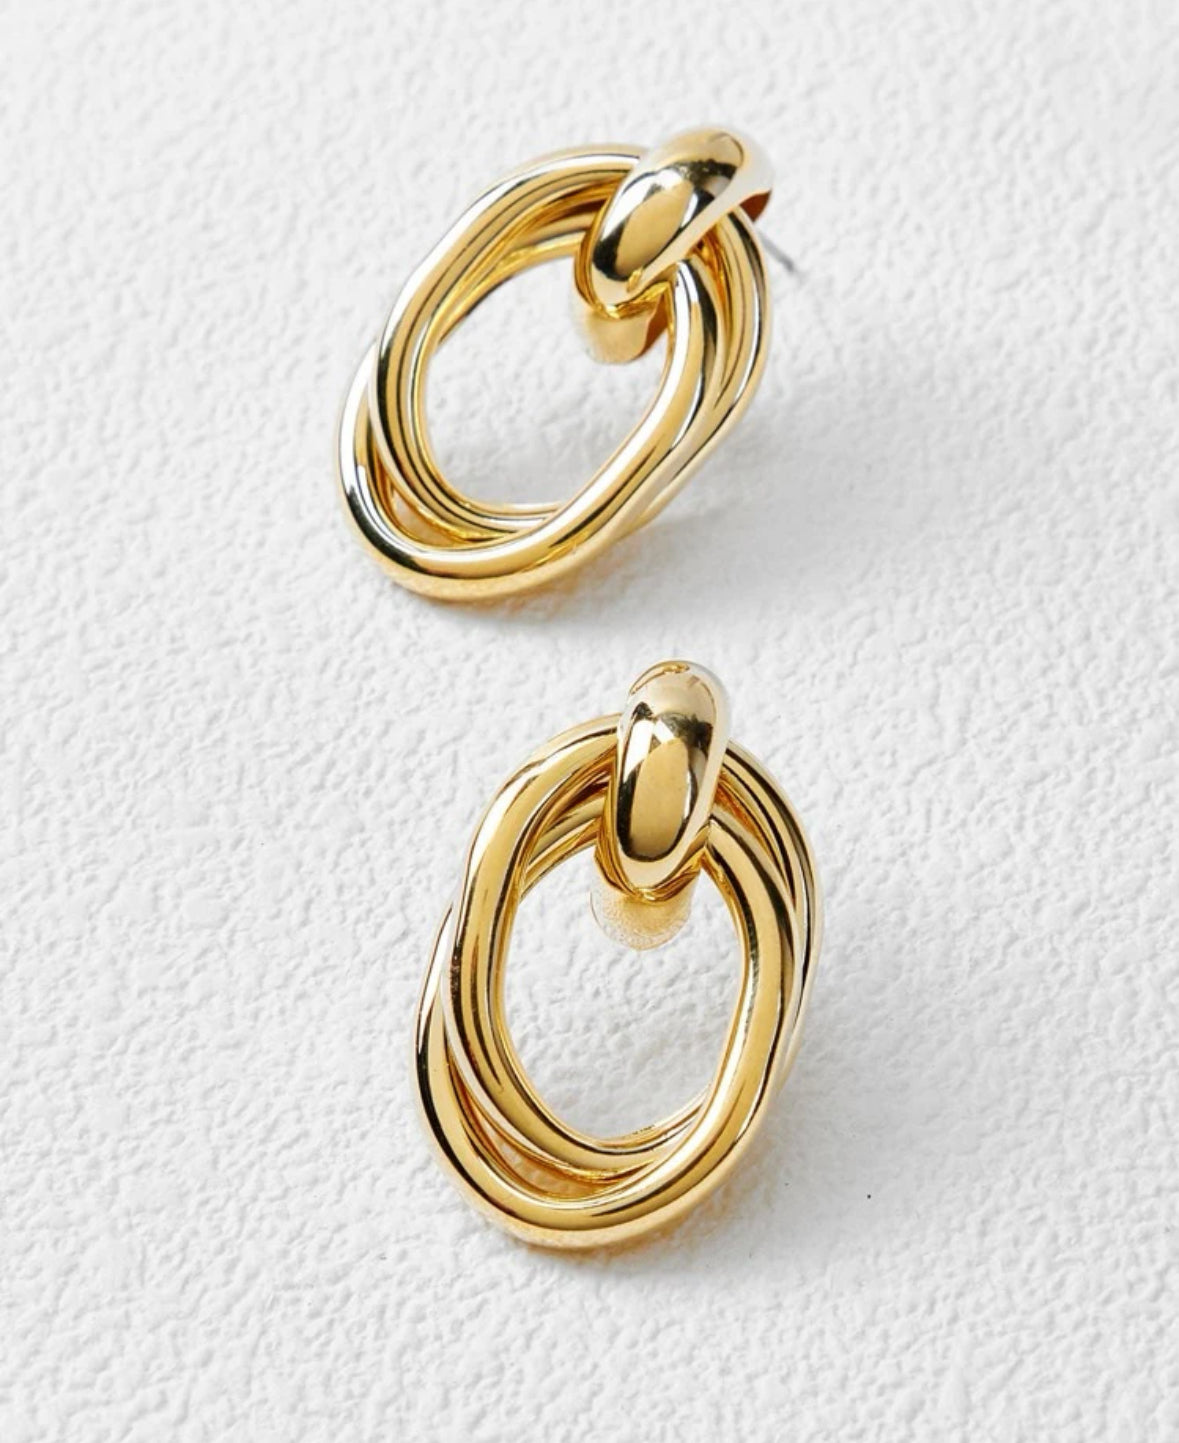 angled pair of 14k gold pated earring